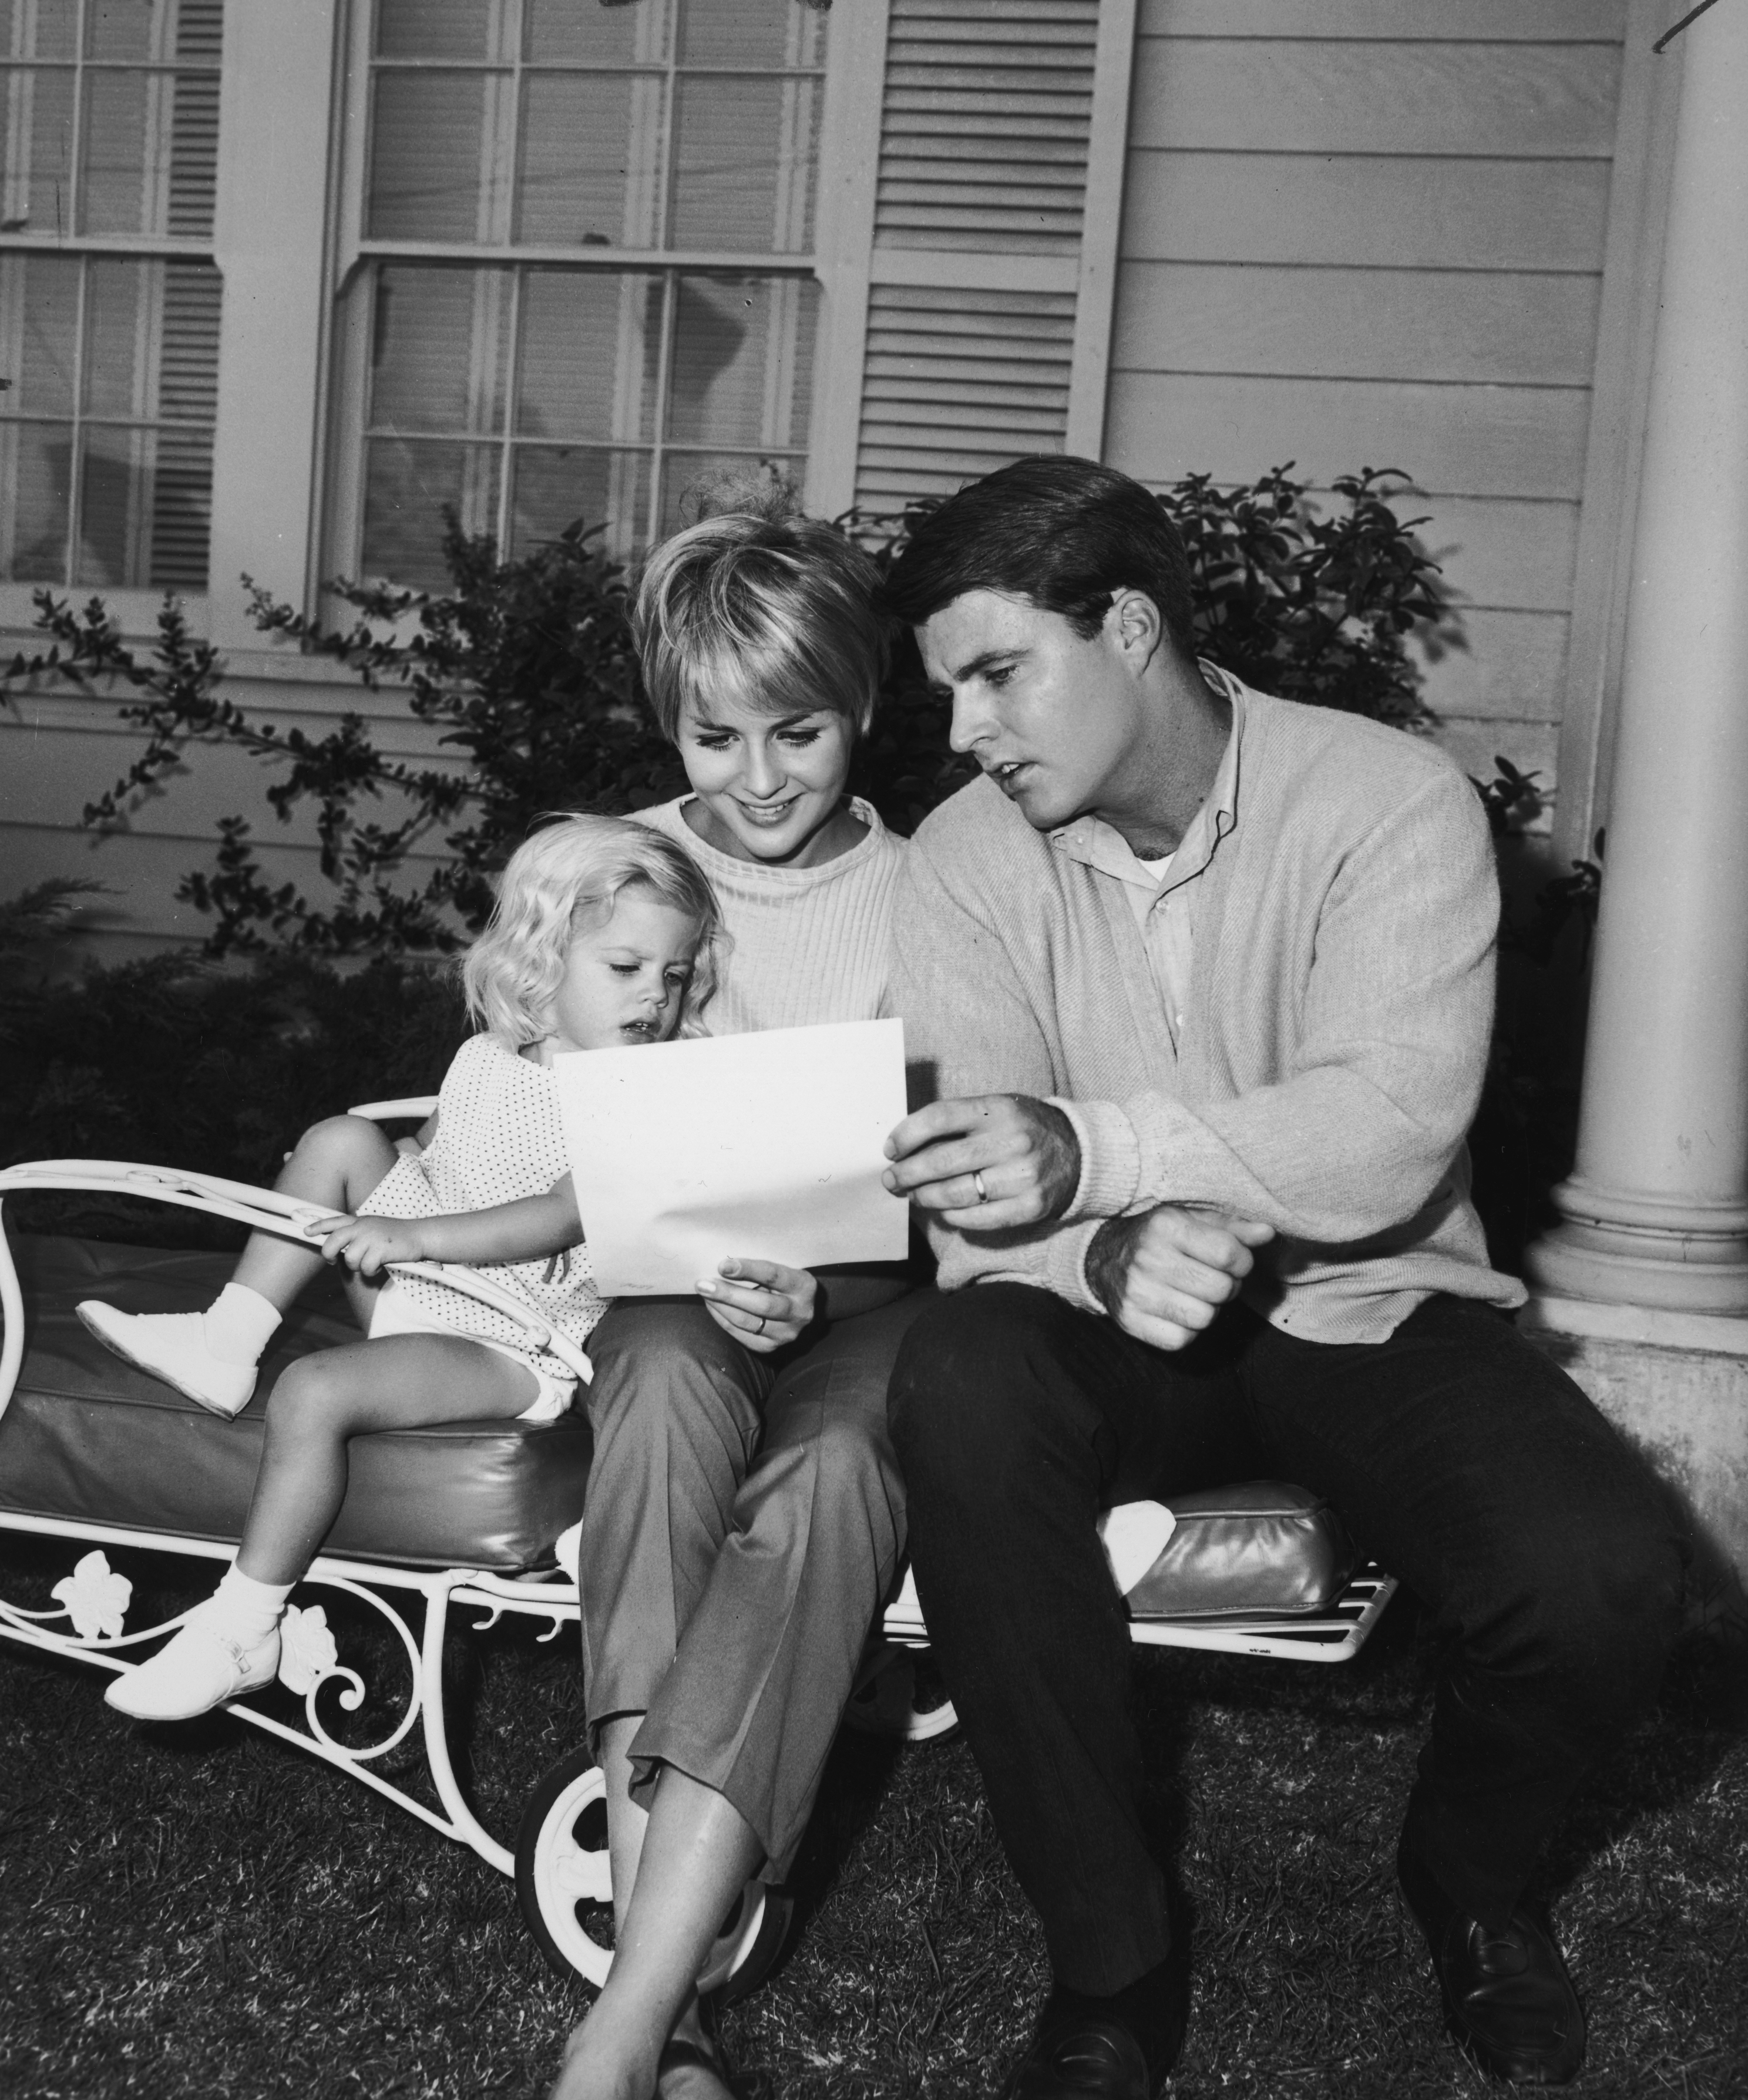 Rick Nelson (1940-1985) sits outdoors on a lawn chair with his wife Kristin Harmon and their daughter Tracy | Source: Getty Images